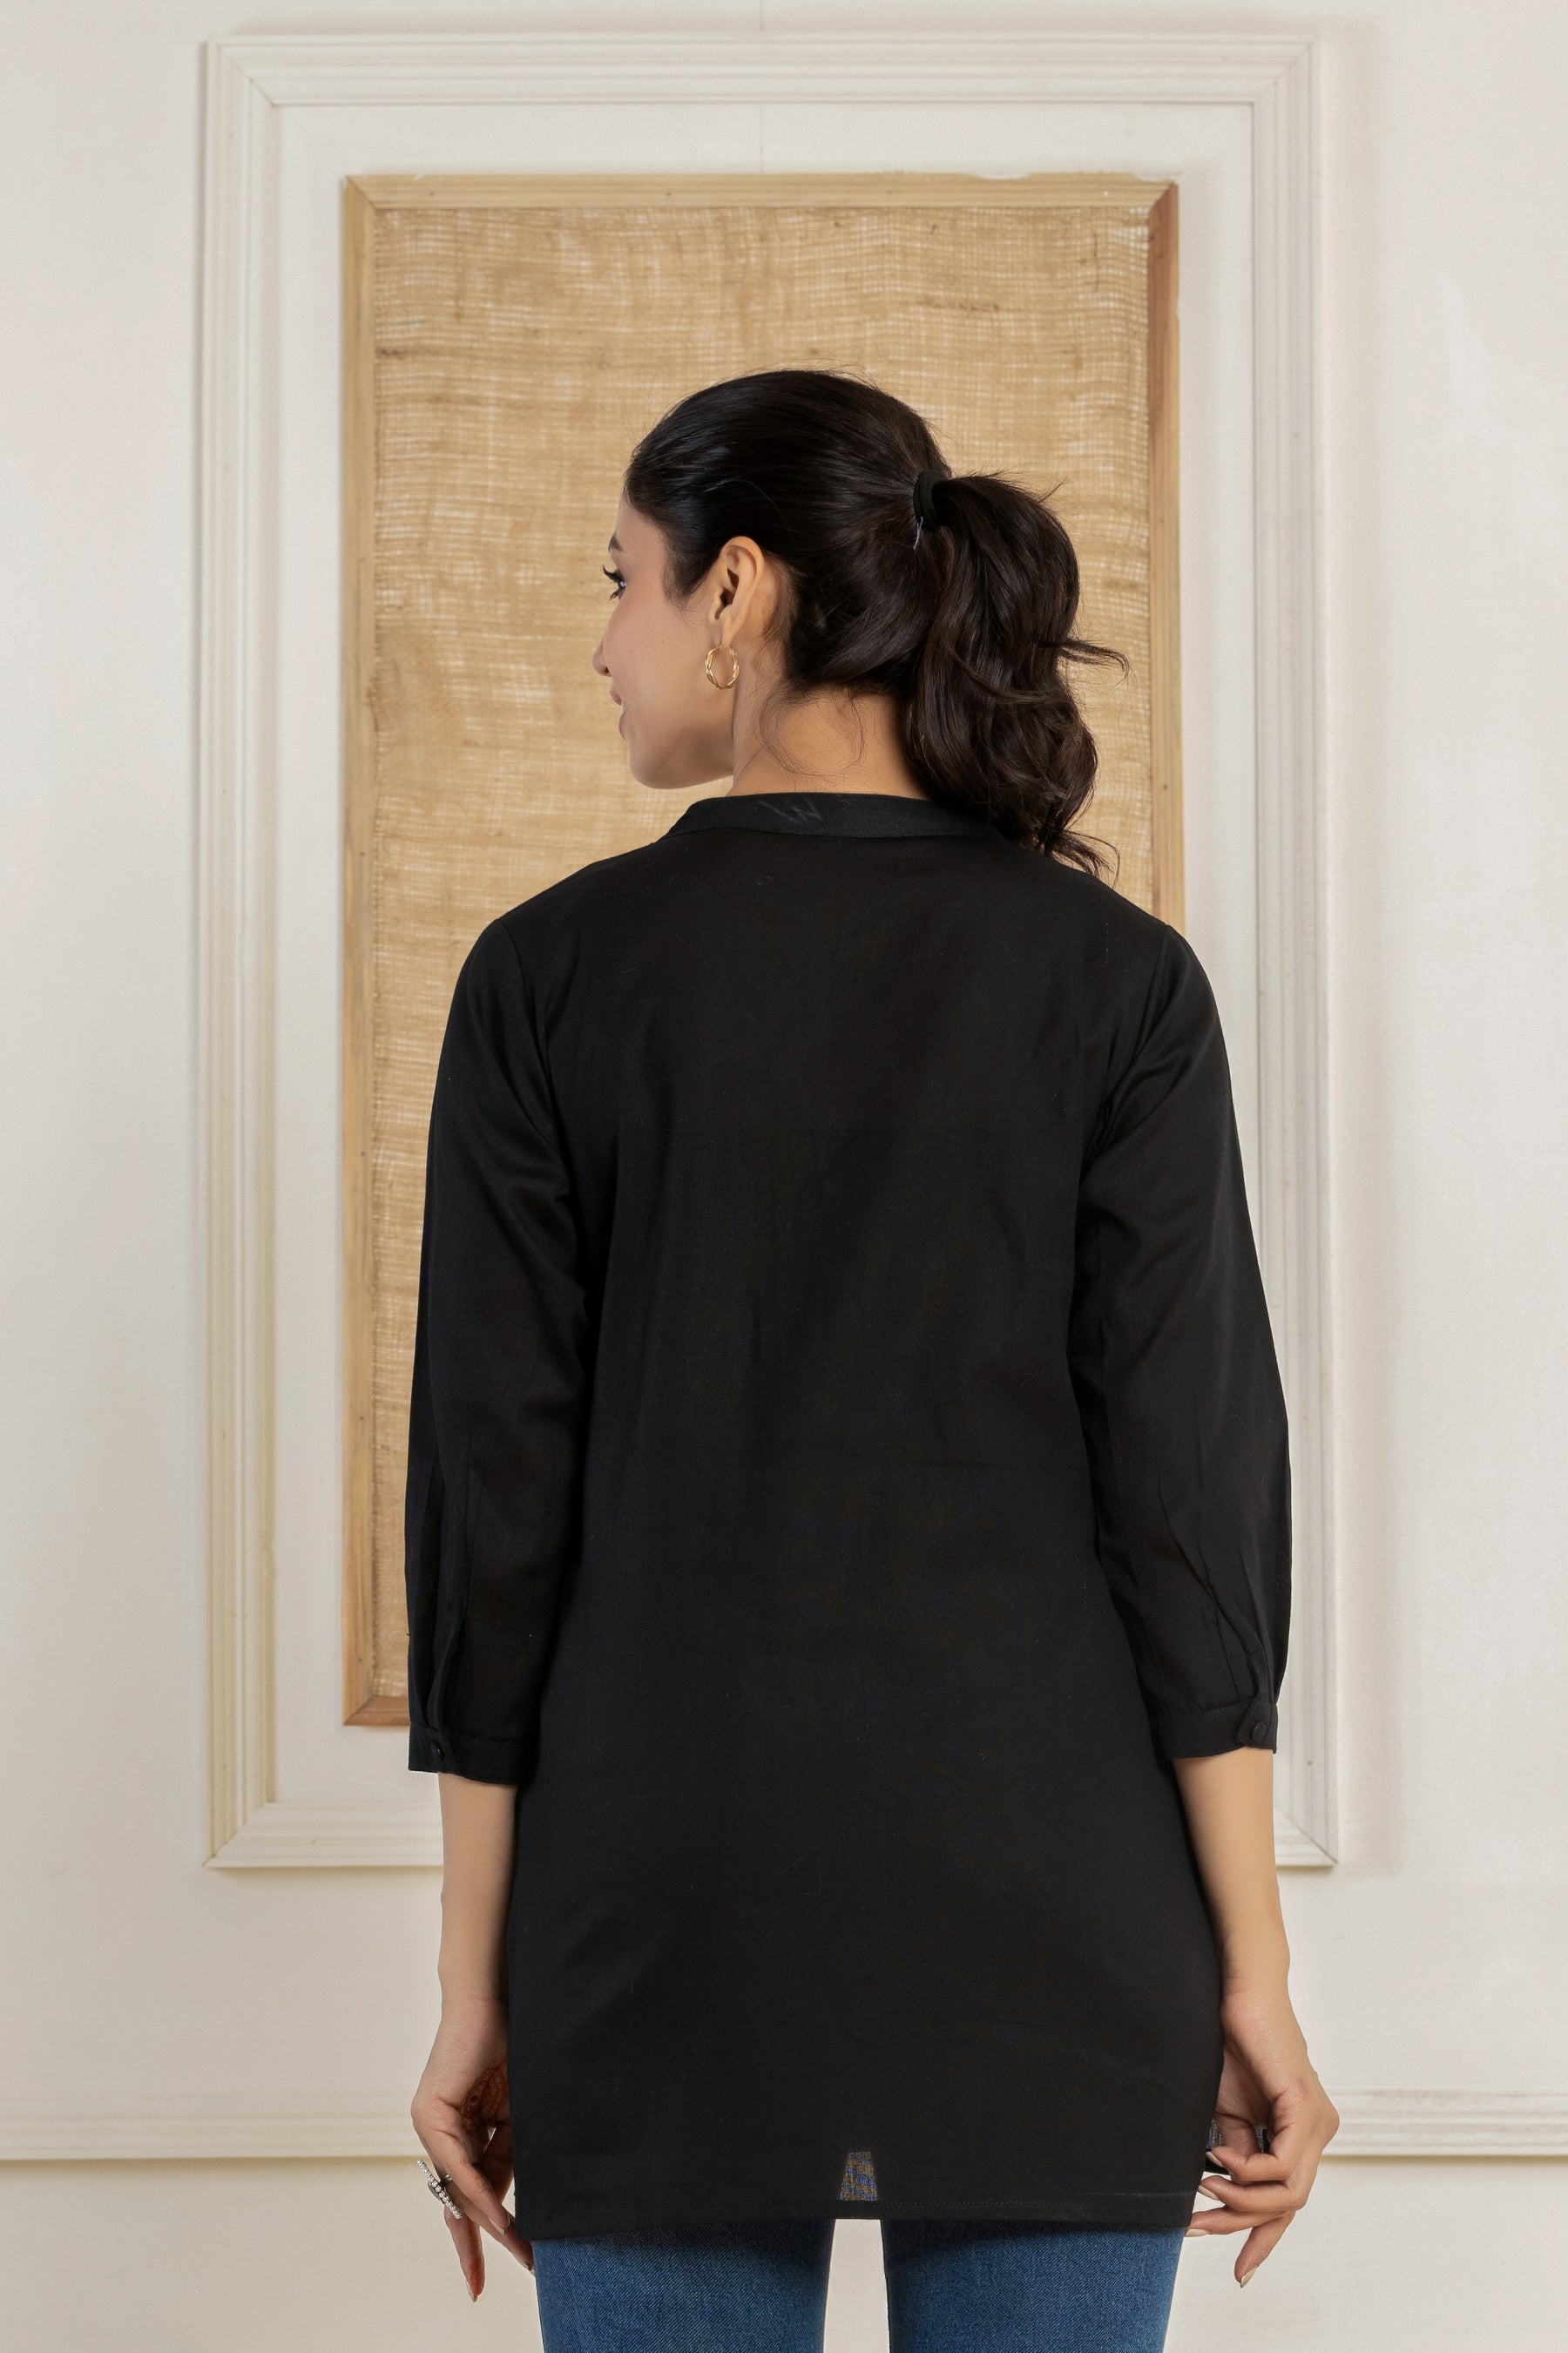 Solid black flex top with potli buttons